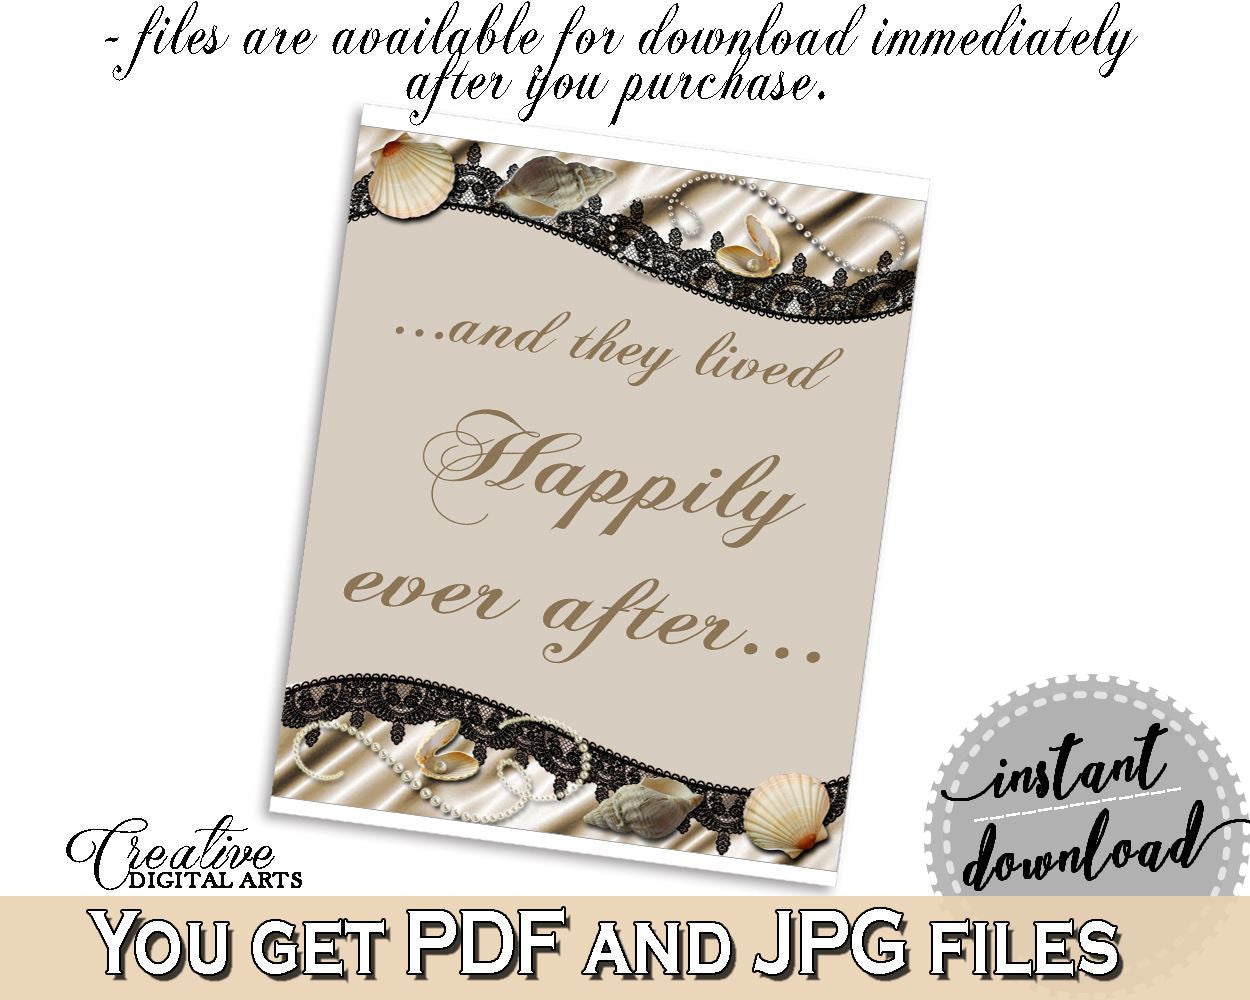 Brown And Beige Seashells And Pearls Bridal Shower Theme: Happily Ever After Sign - love quote, necklace bridal, customizable files - 65924 - Digital Product